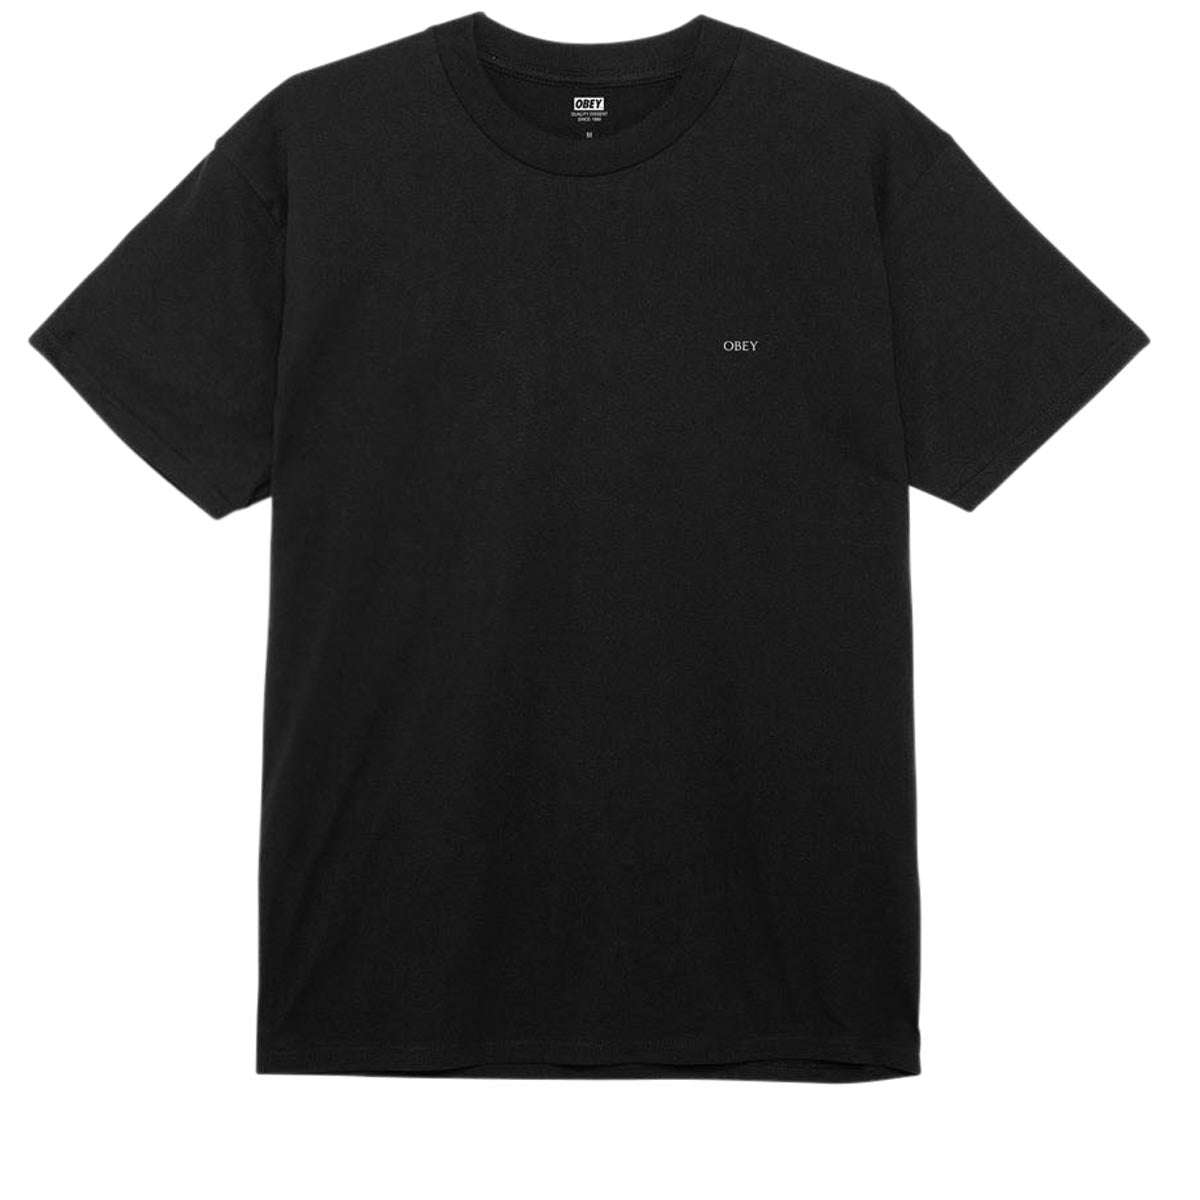 Obey Ripped Icon T-Shirt - Black image 2